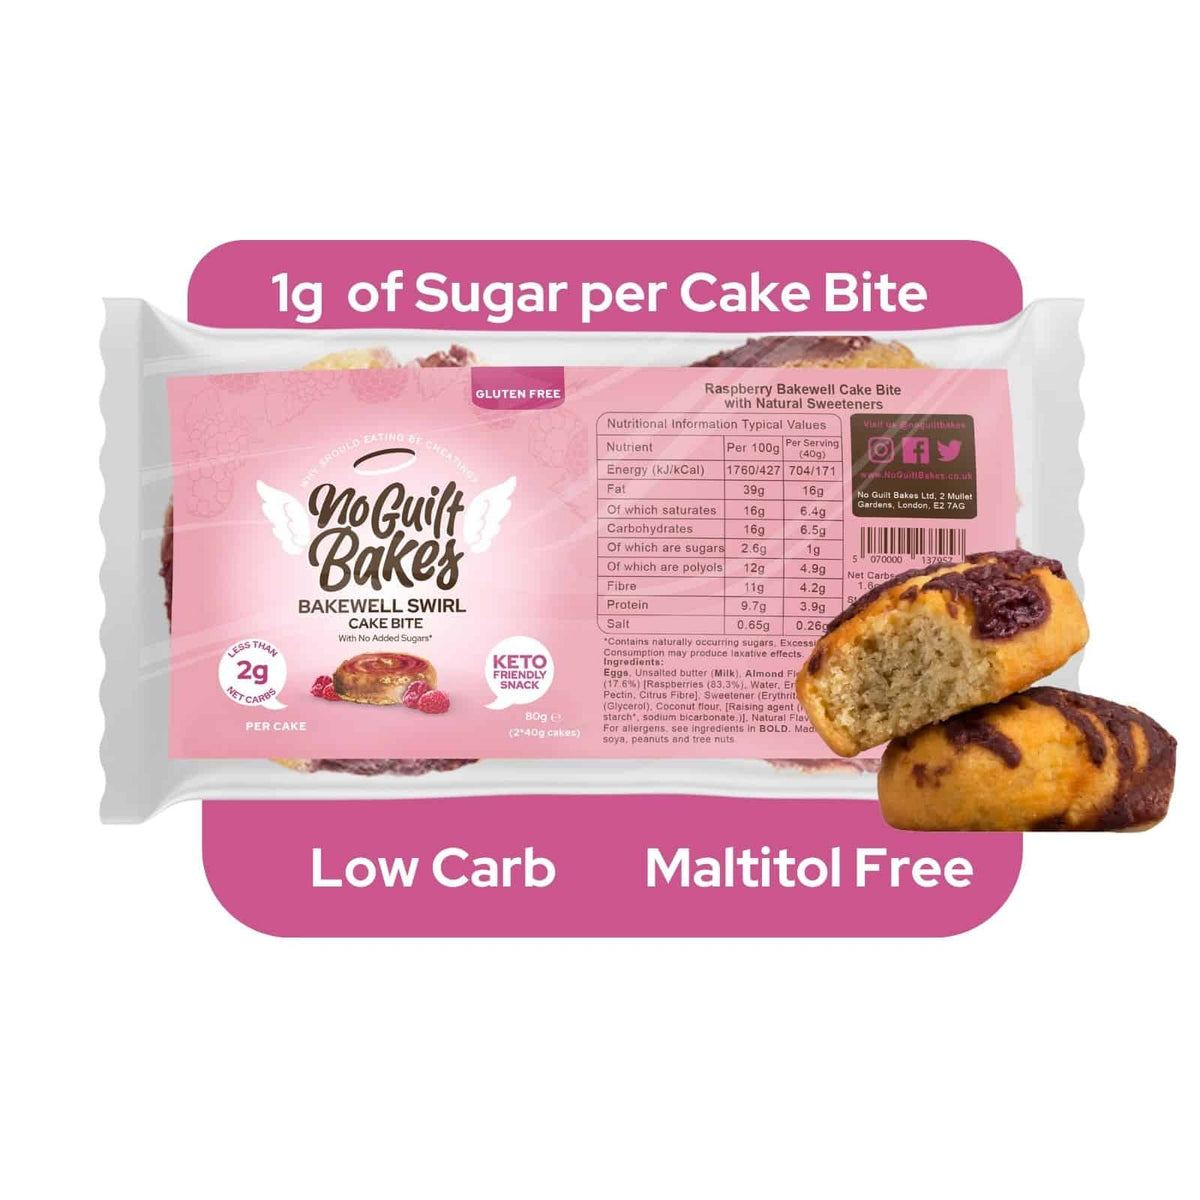 Introducing our Raspberry Bakewell Swirl Keto Cake Bites from No Guilt Bakes, the perfect keto-friendly and ketogenic diet option for all the low carb lovers out there. Enjoy the indulgent taste of cake bites while staying on track with Raspberry Bakewell Swirl Keto Cake Bites.